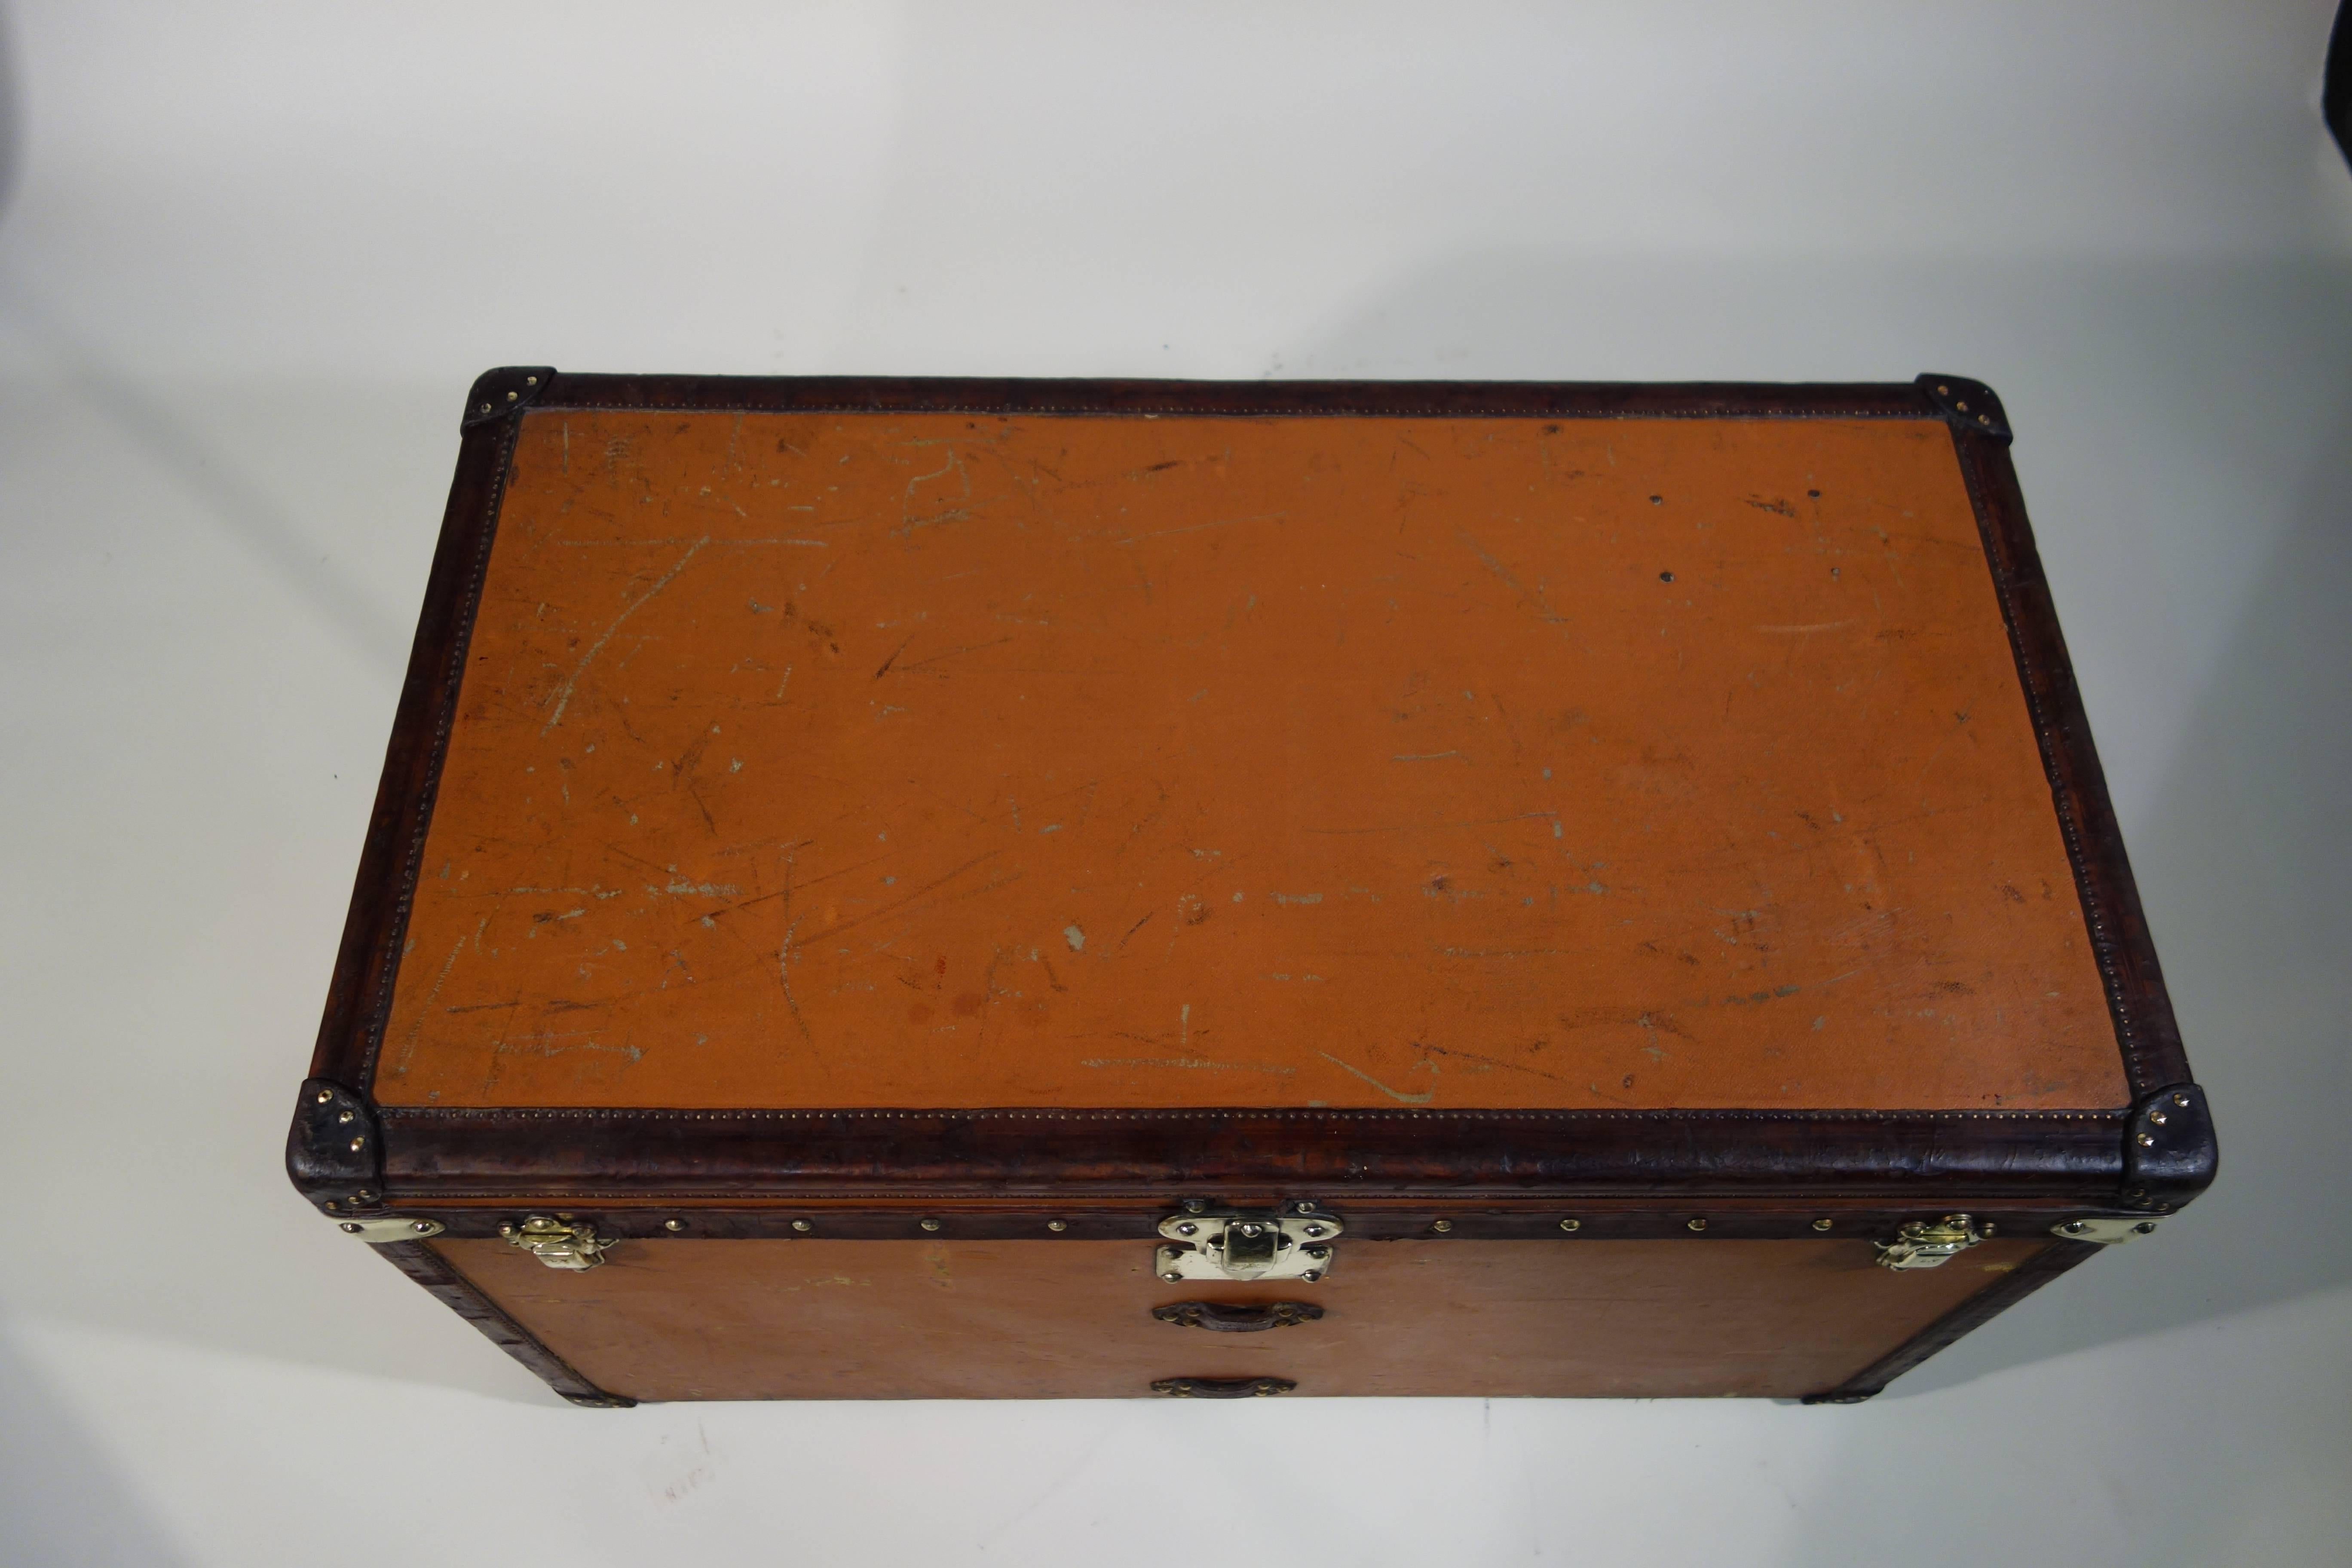 French 1910s Orange Louis Vuitton Steamer Trunk or Malle Courrier Vuitonite Orange For Sale